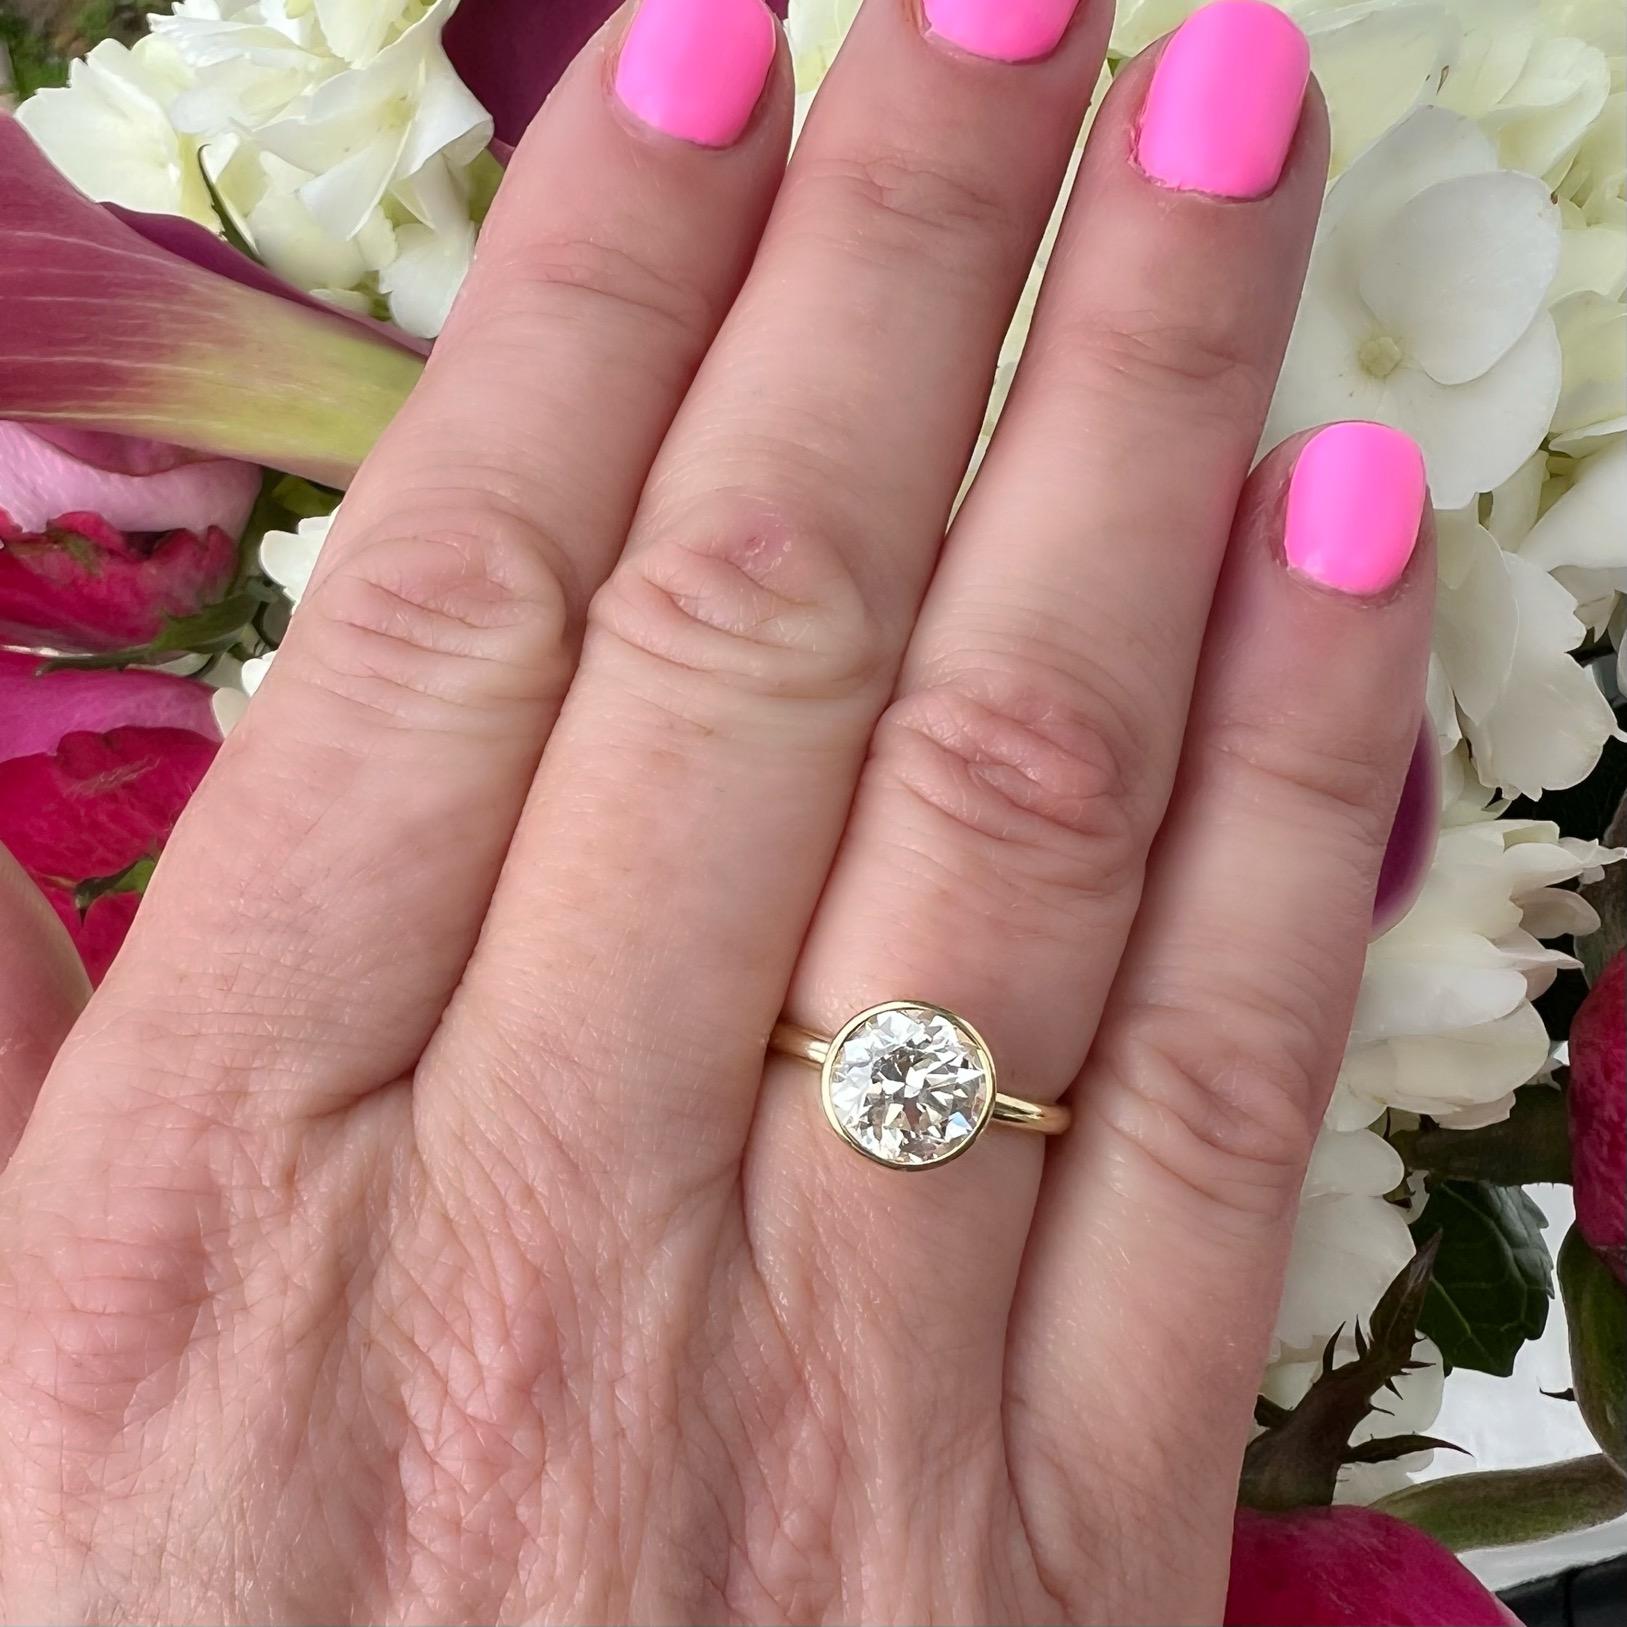 Truly a one of a kind! This exquisite 18 karat yellow gold beauty features a gorgeous Old European Cut Diamond weighing 2.04 carats, expertly bezel set in this open basket design allowing for the entire stone to be visible from table to culet. The